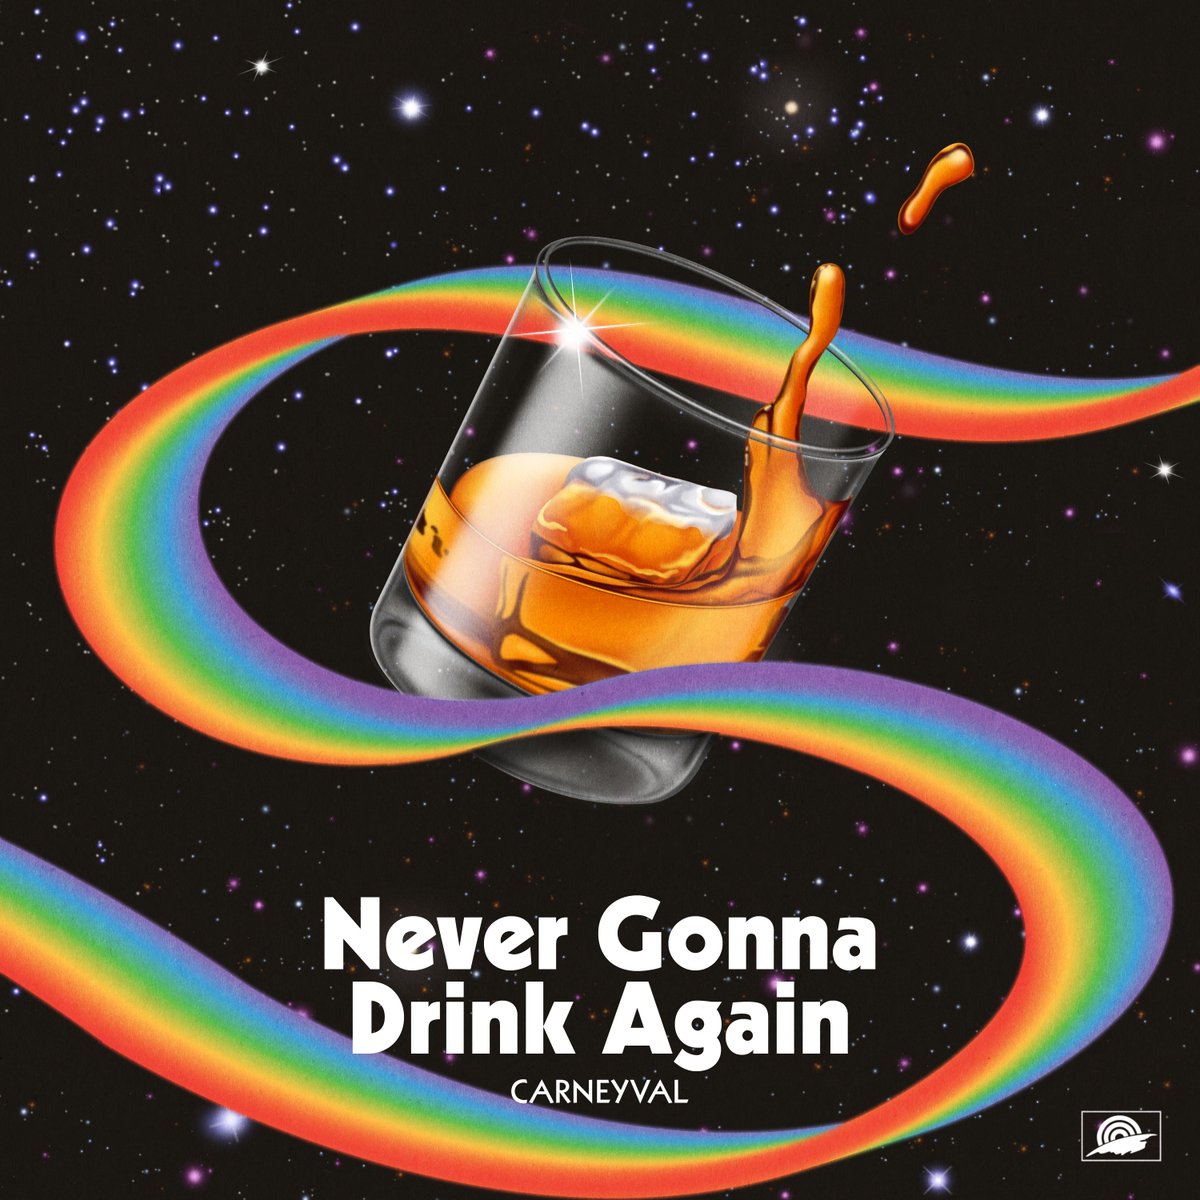 Never Gonna Drink Again coming July 14th! Who wants a sneak peek?? 🫣